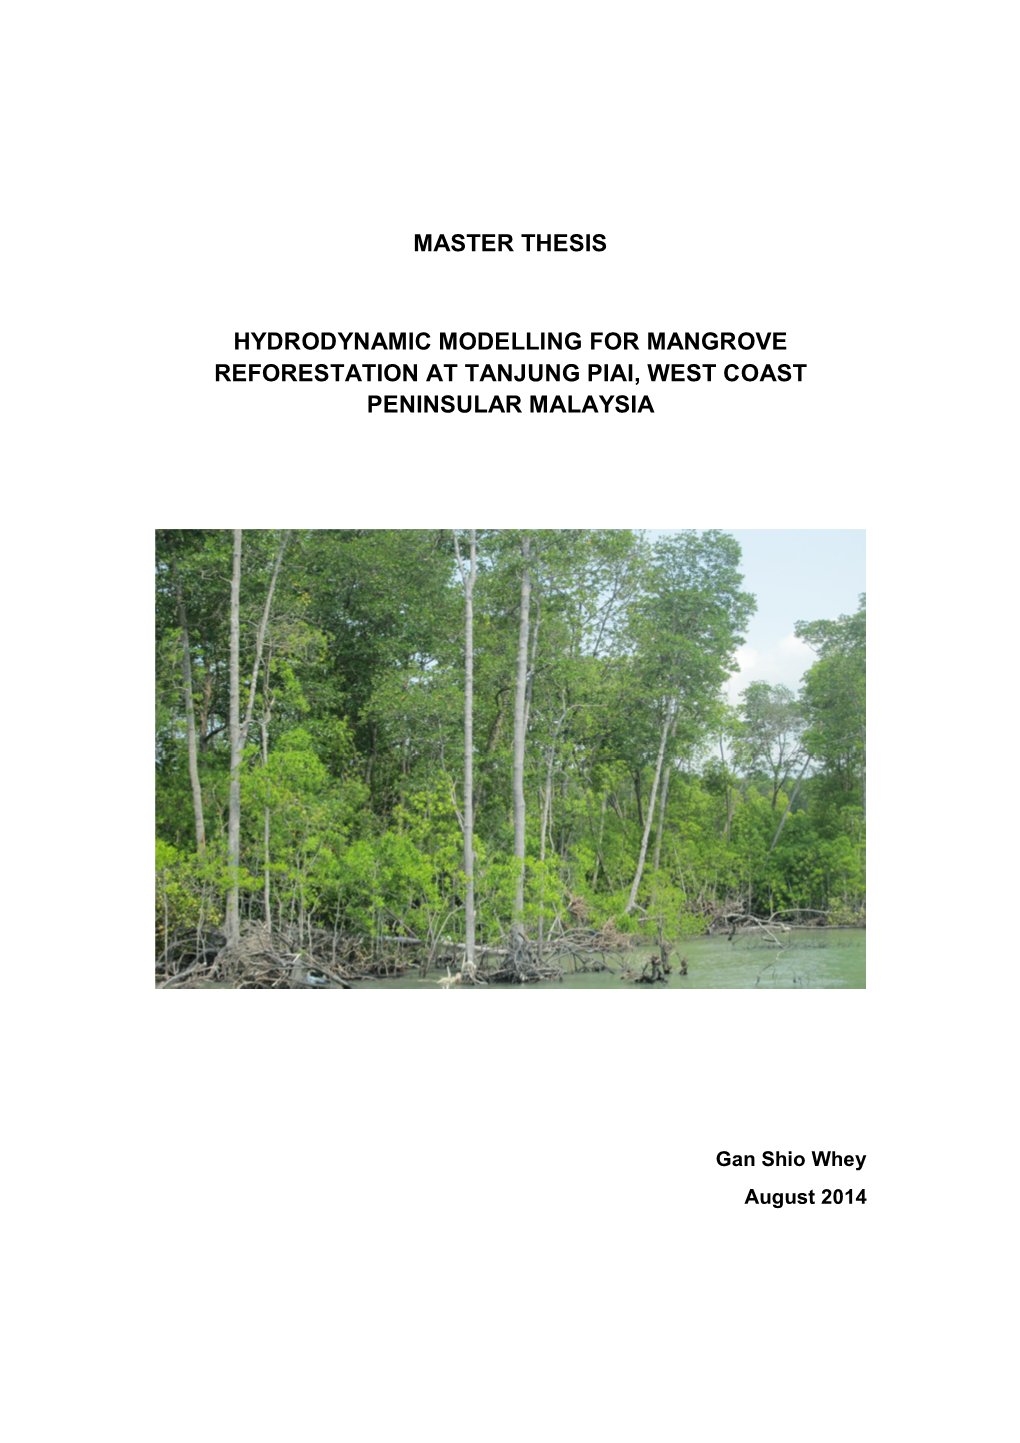 Master Thesis Hydrodynamic Modelling for Mangrove